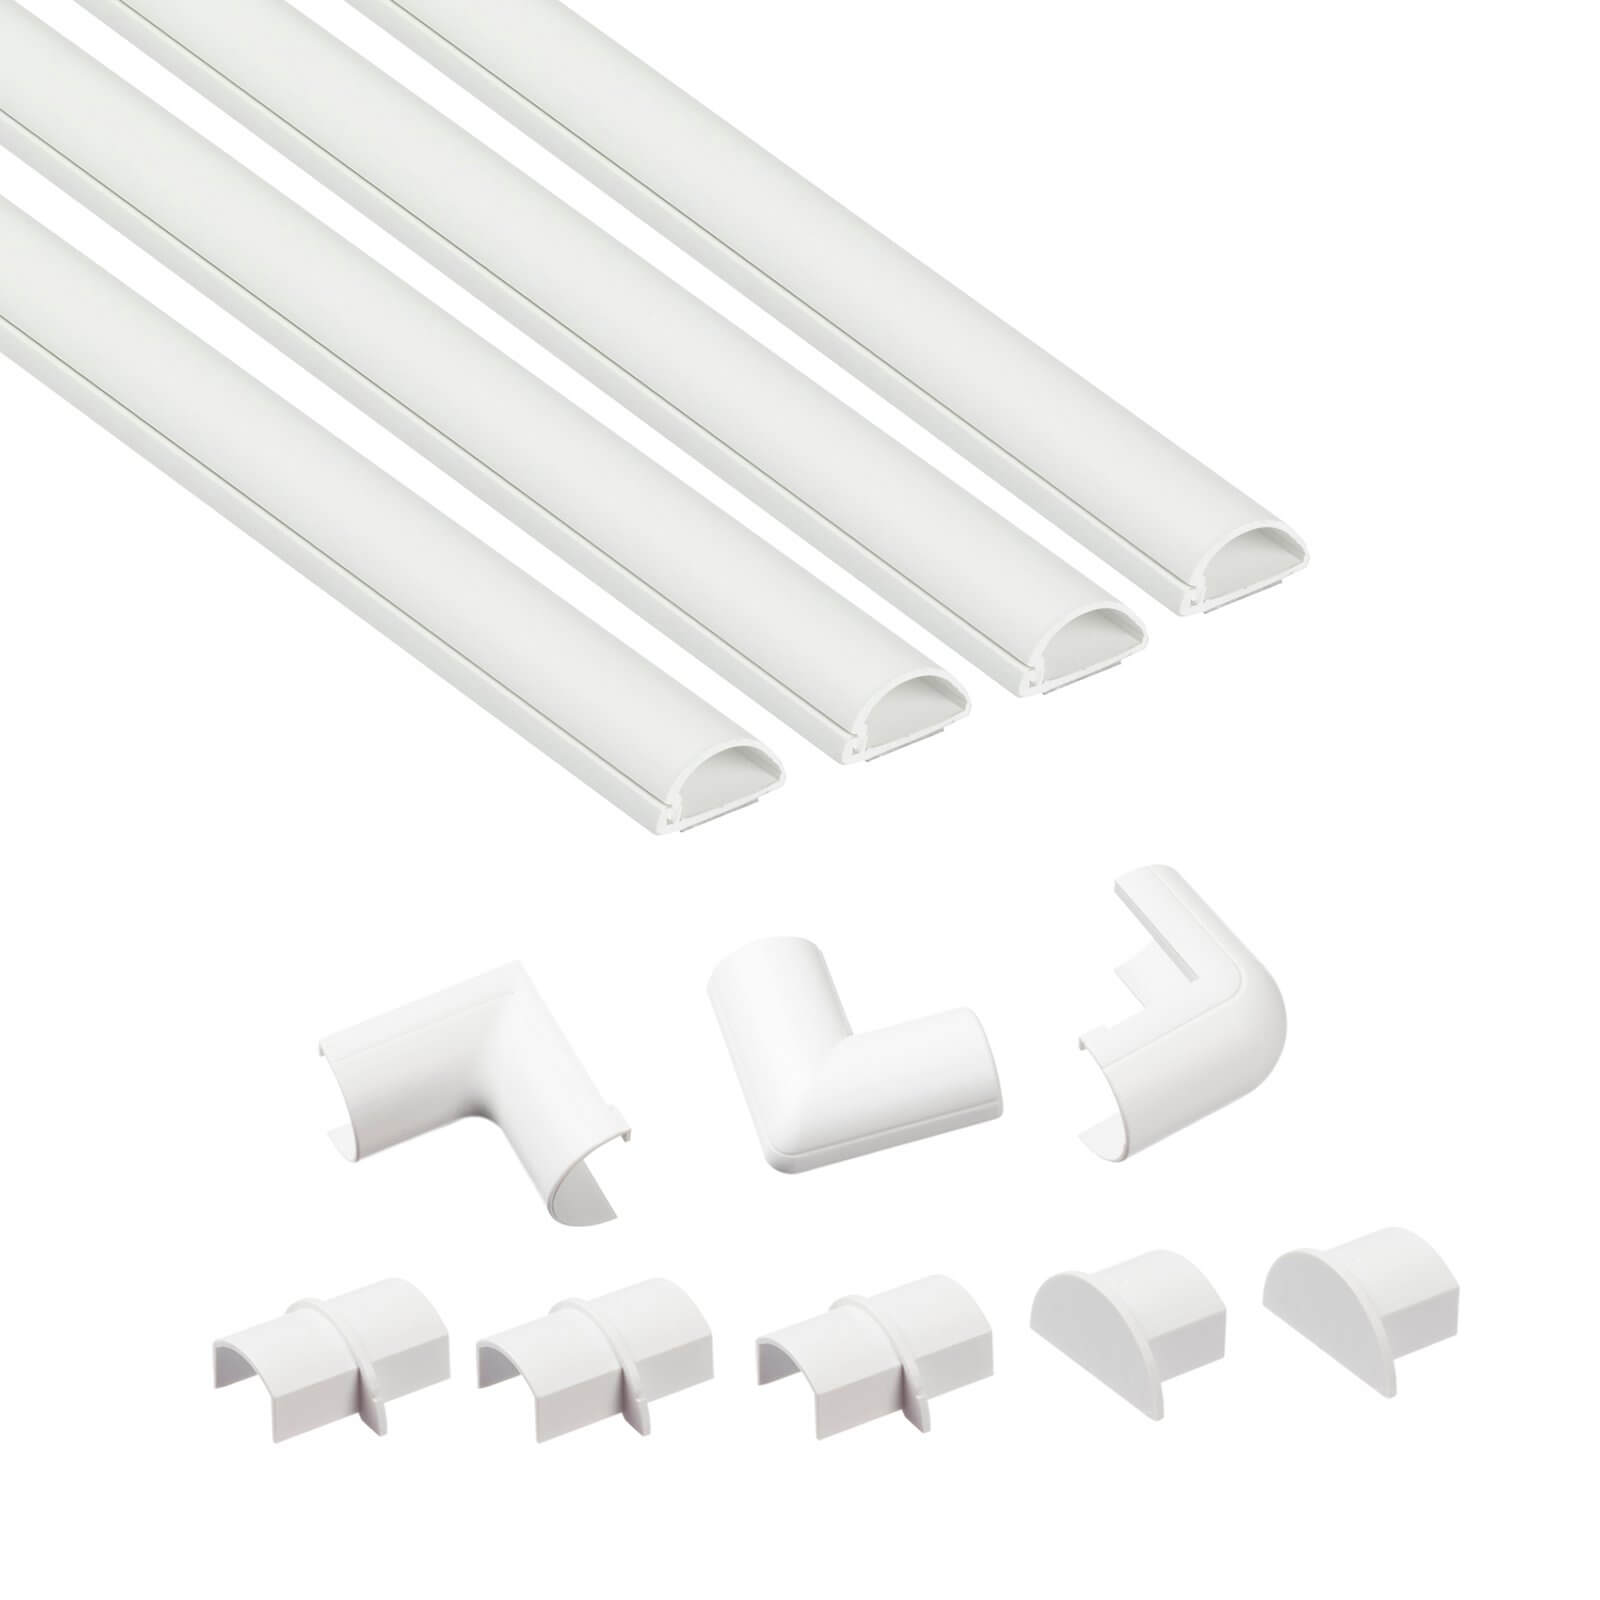 Photo of D-line Micro+ Decorative Self Adhesive Trunking Multipack 4 X 20mm X 10mm X 1-meter Lengths & Accessories - White